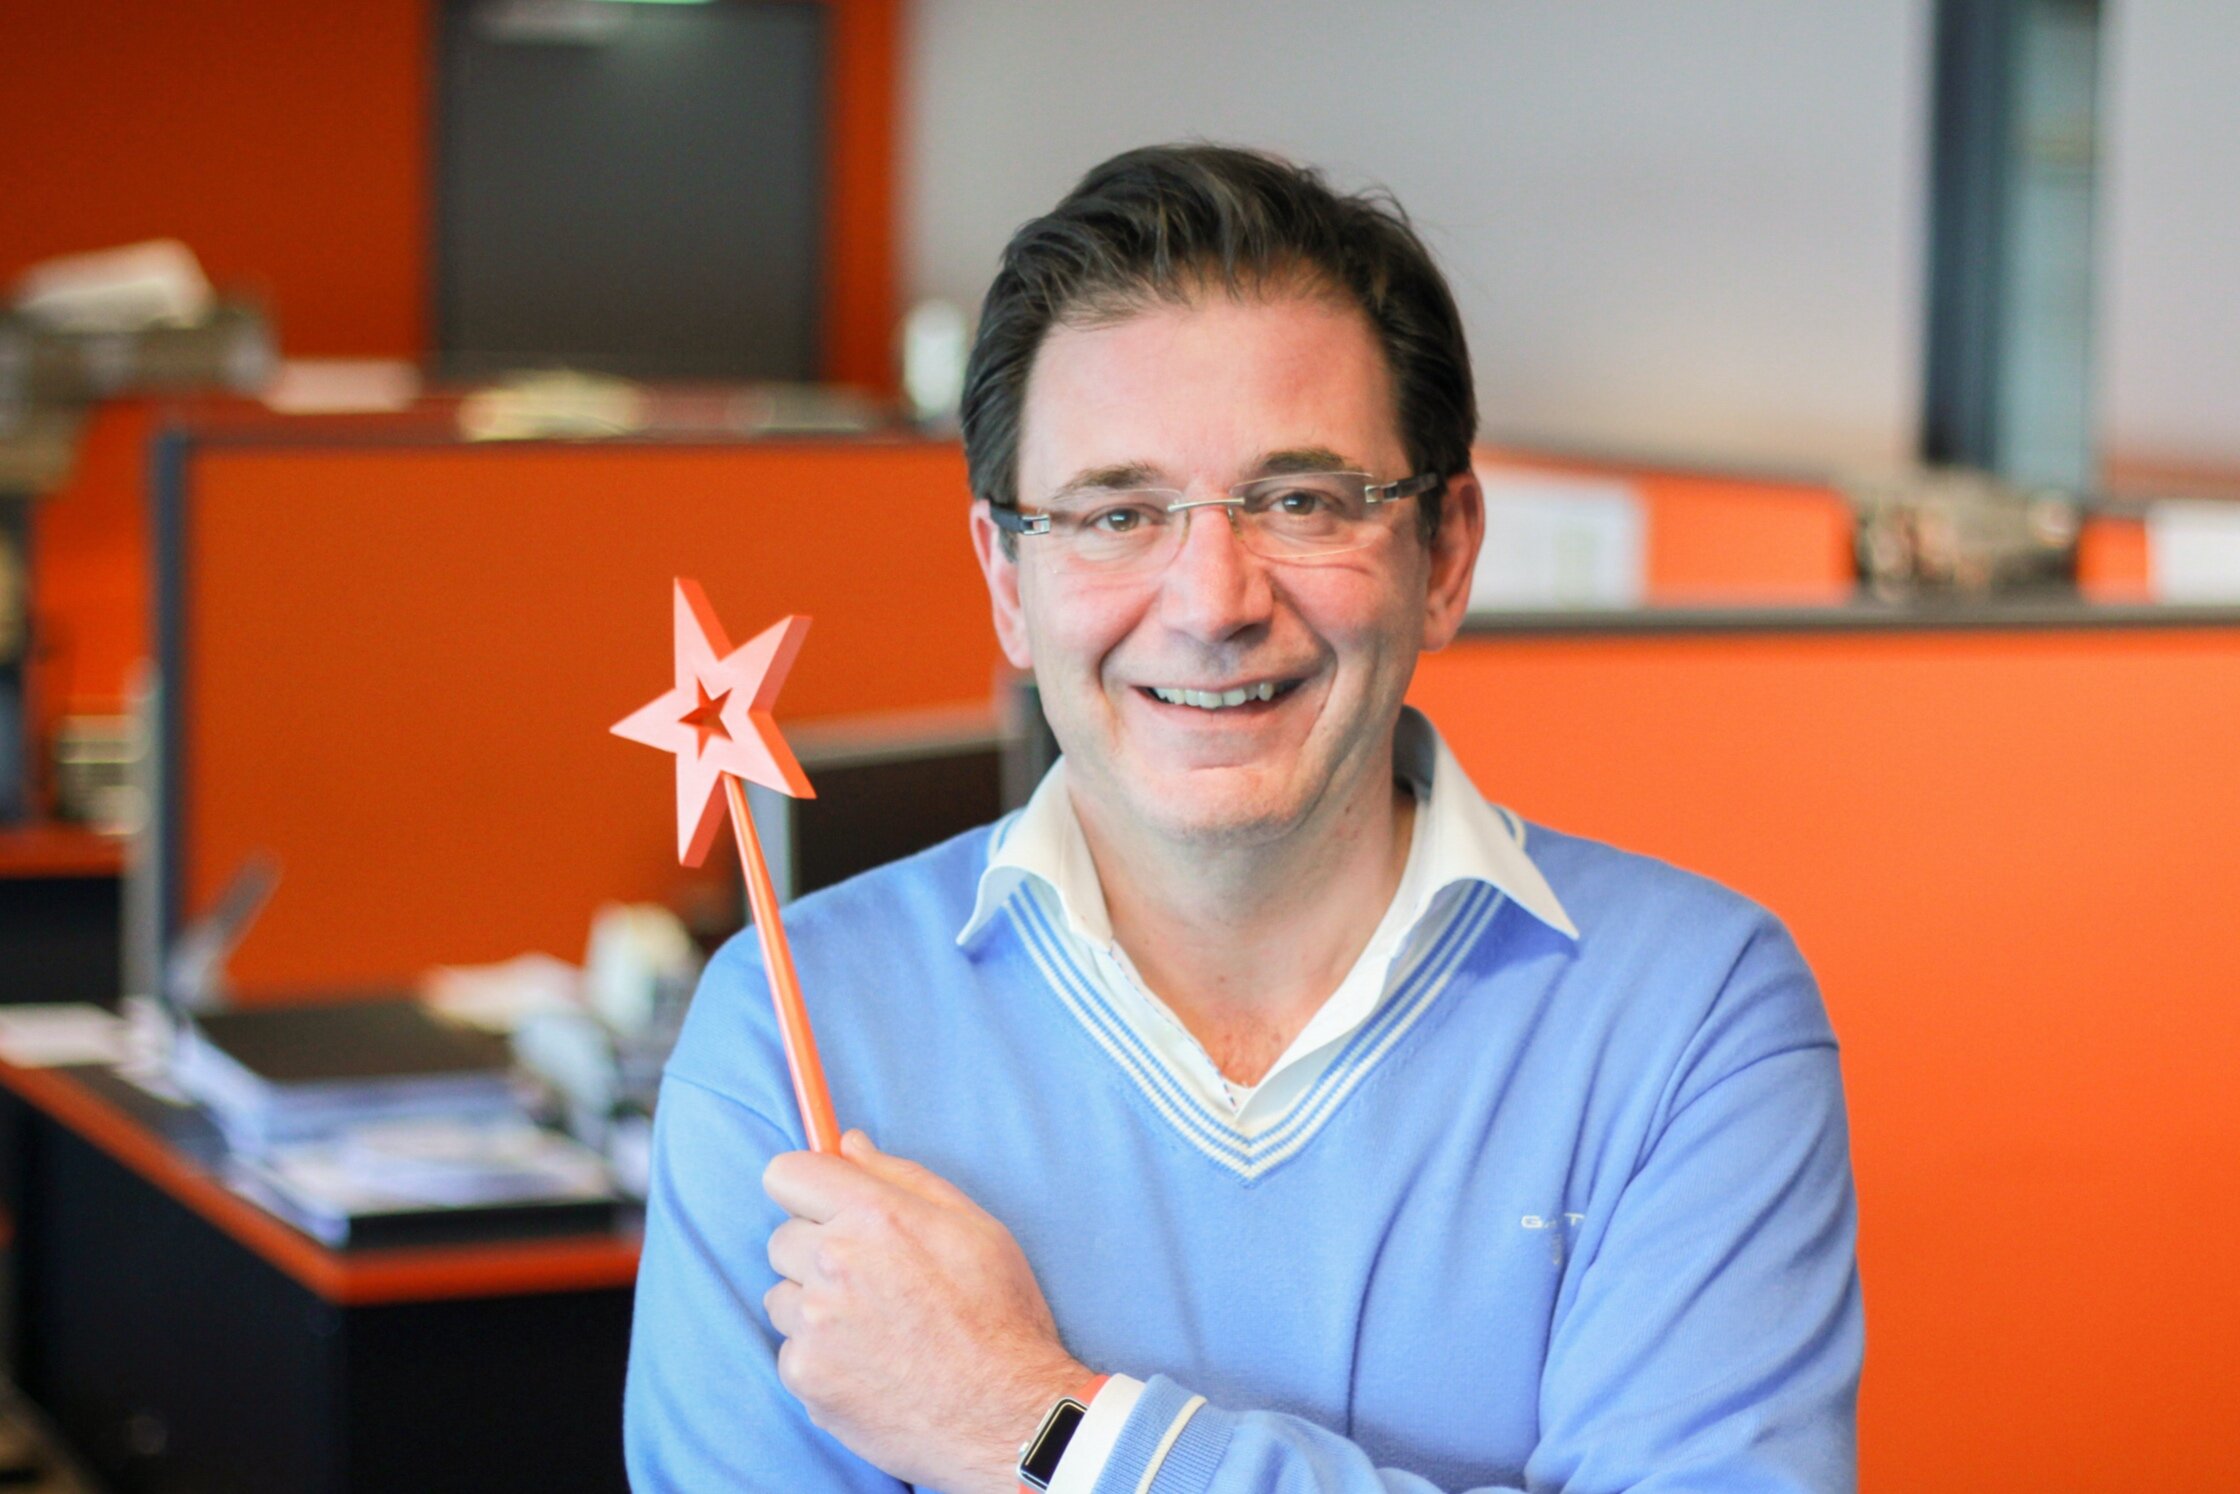 JAN MAARTEN<strong>25 years ago, I couldn’t have imagined that we would be working with such a passionate team to become a strong, recognized player in the leisure industry.</strong>